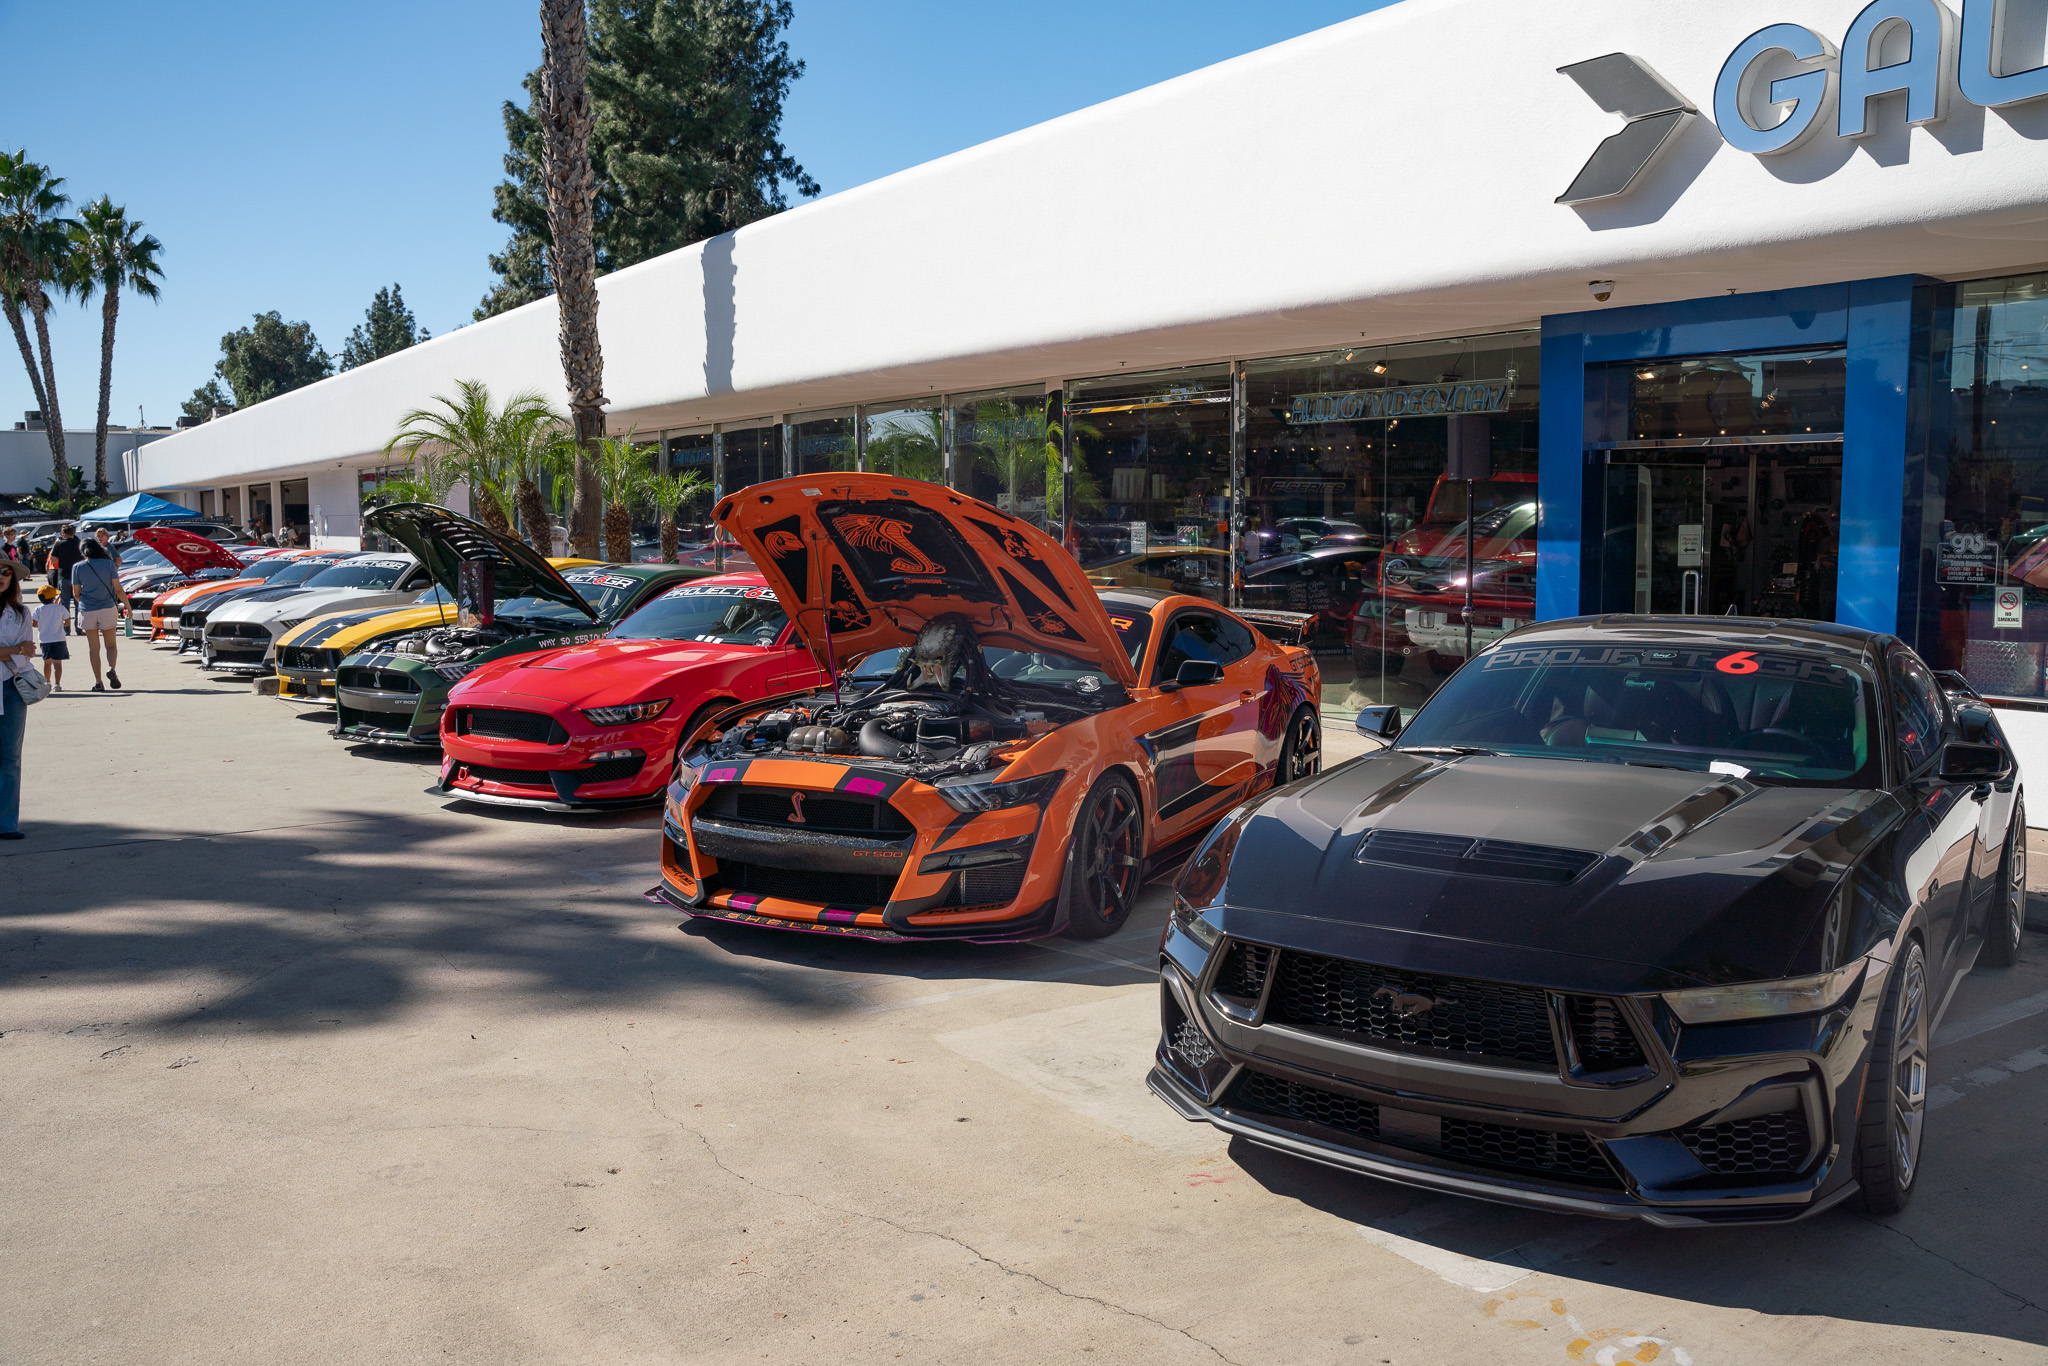 2023 GALPINAUTOSPORTS Car Show / Featuring Project 6GR & Socal